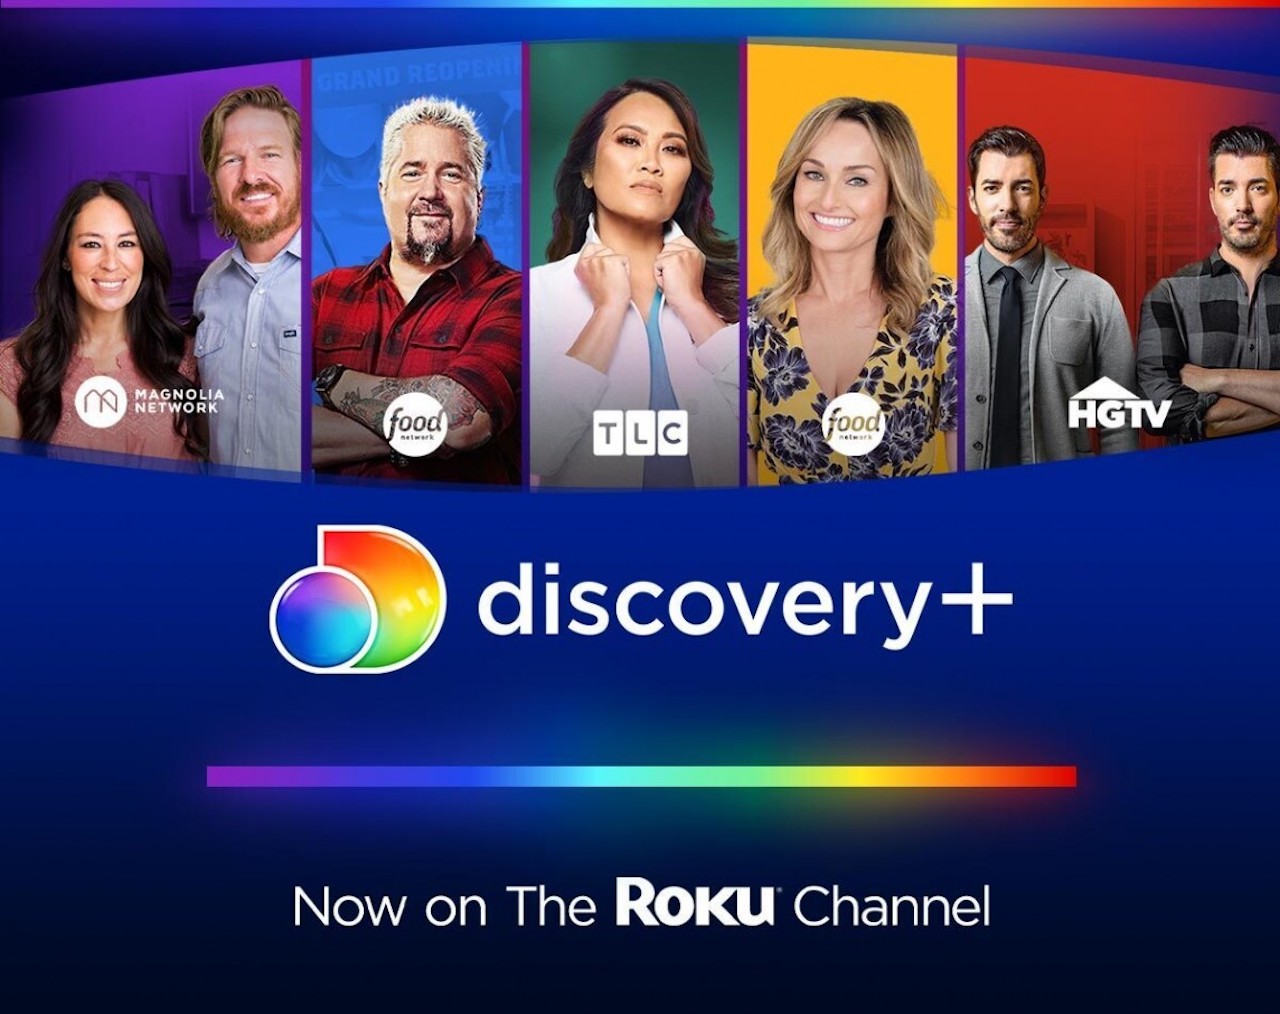 How to activate discovery+ on The Roku Channel?